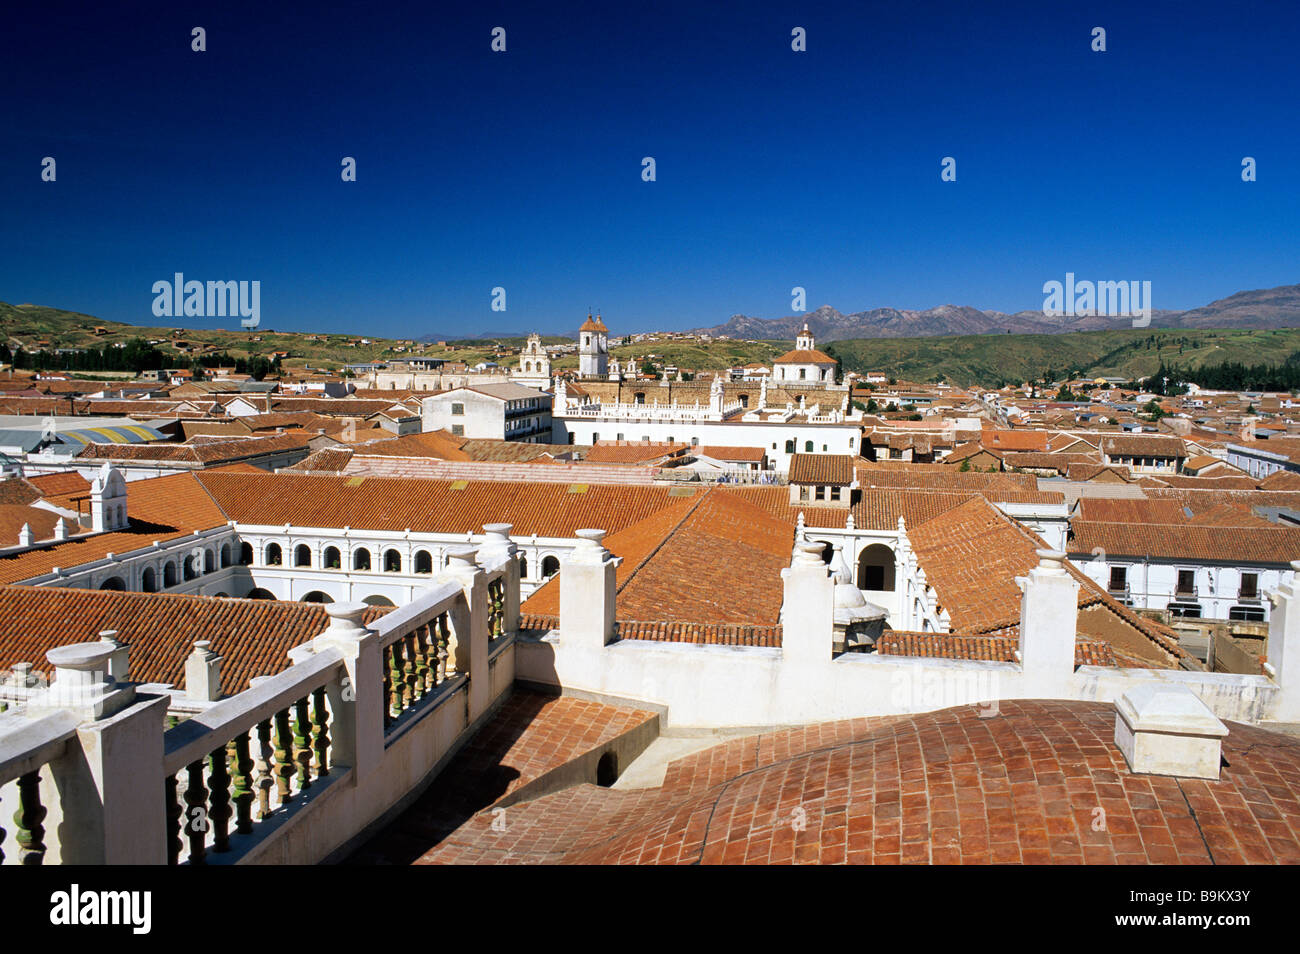 Bolivia, Chuquisaca department, Sucre, town classified as World Heritage by UNESCO, panoramic view of the colonial town Stock Photo